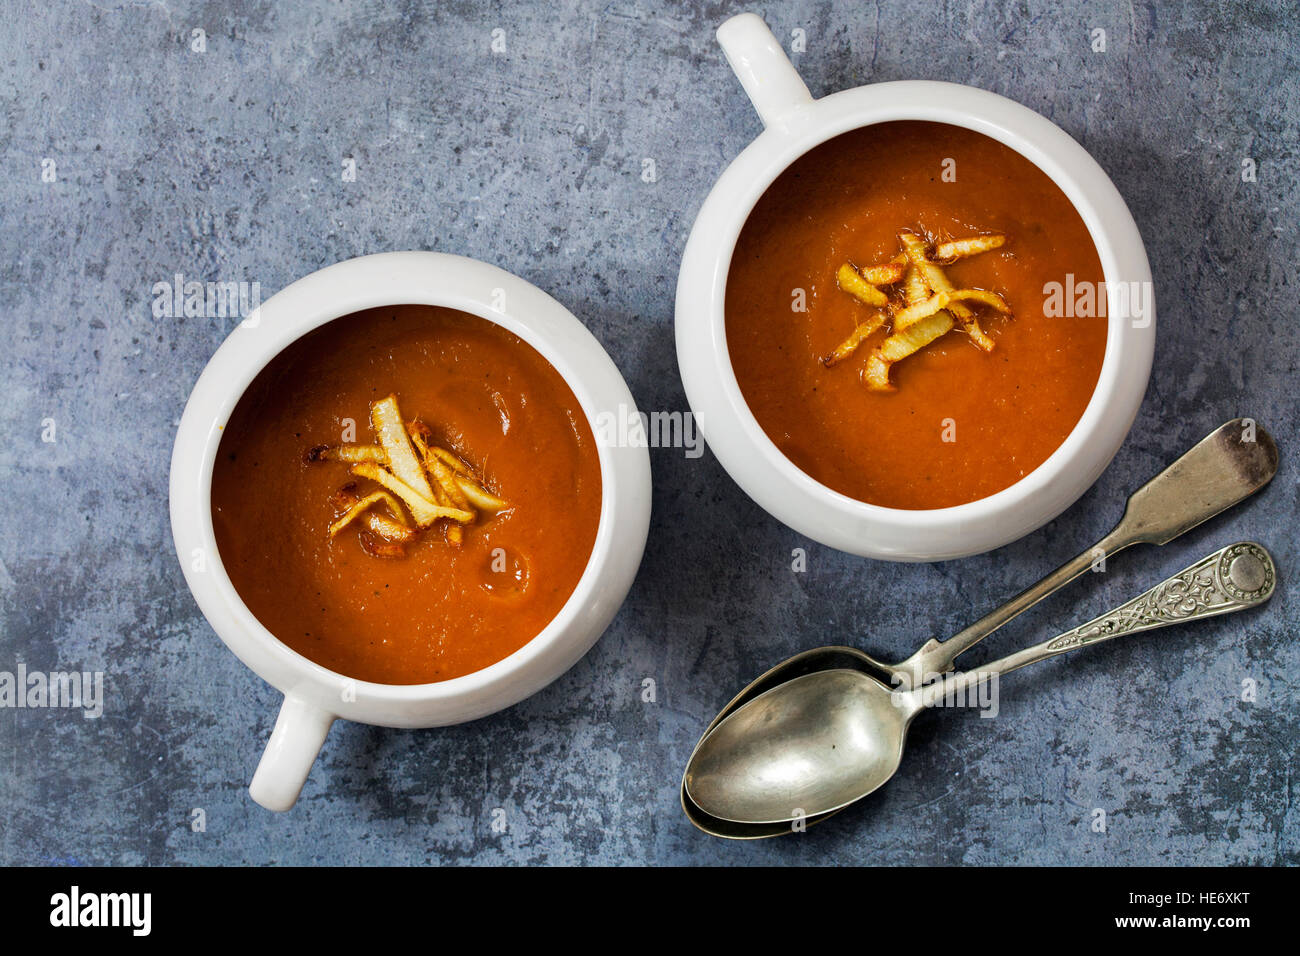 Roast carrot and ginger soup Stock Photo